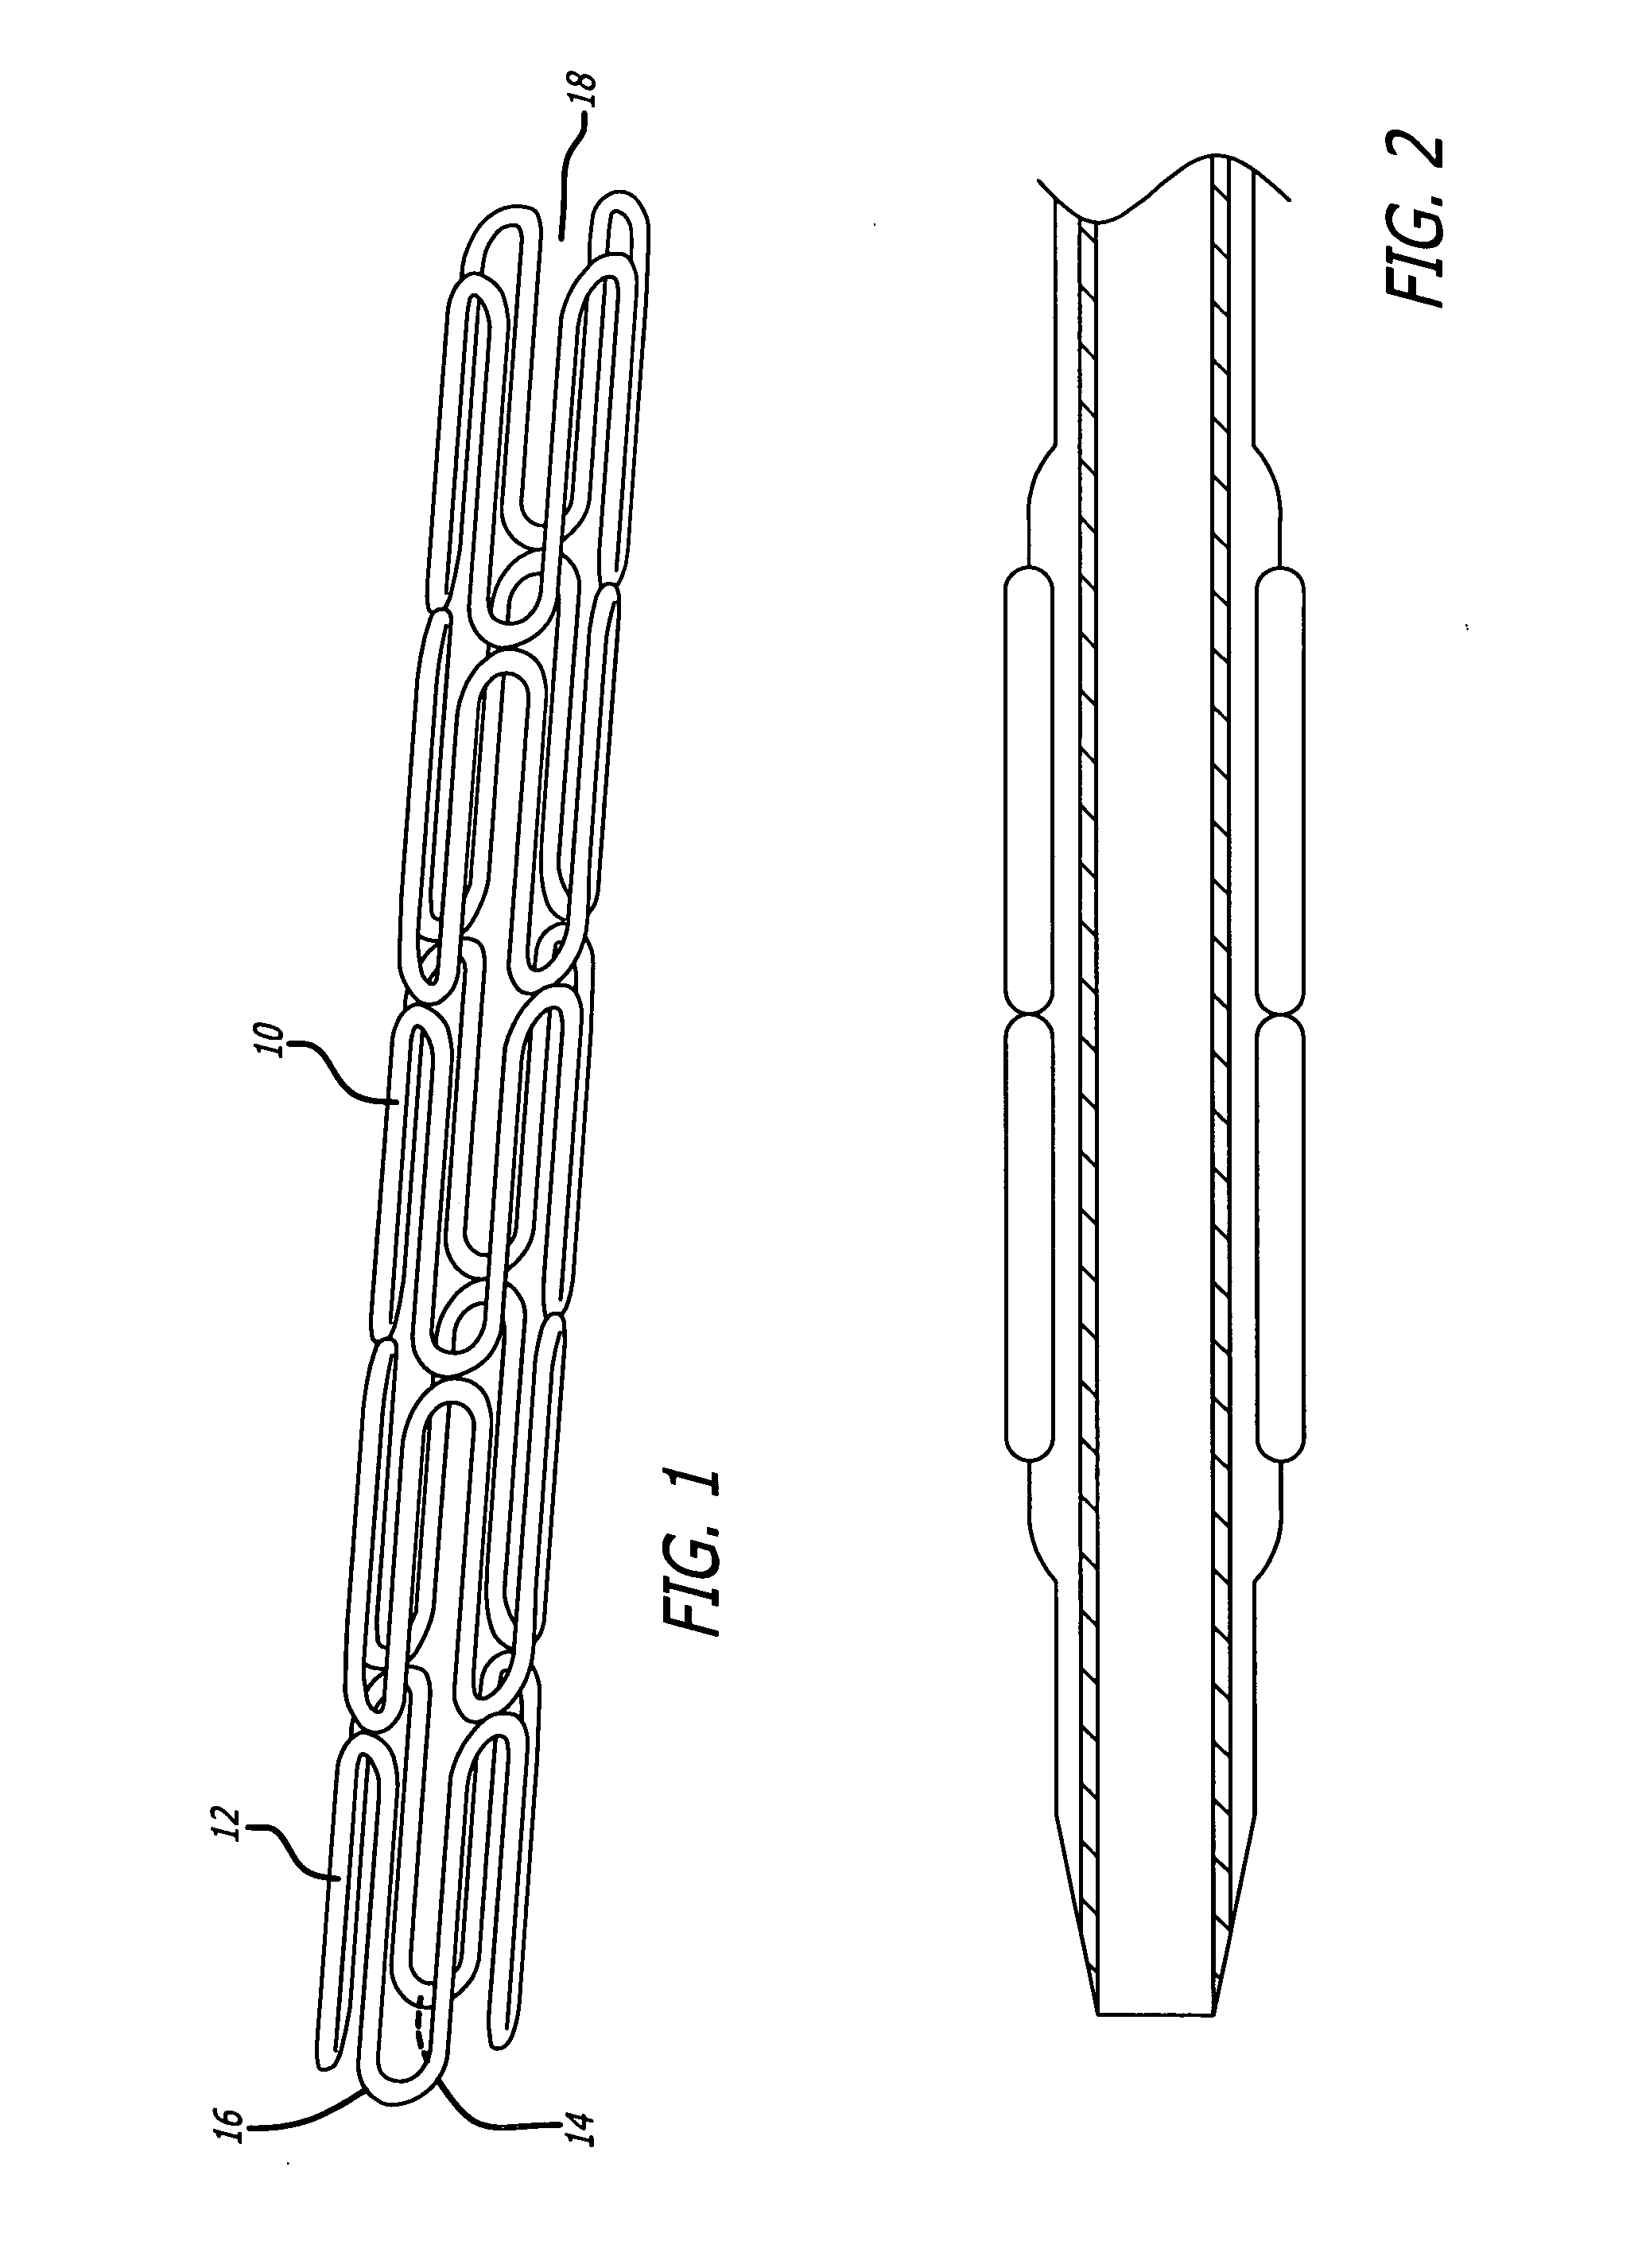 Medical devices and compositions useful for treating or inhibiting restenosis